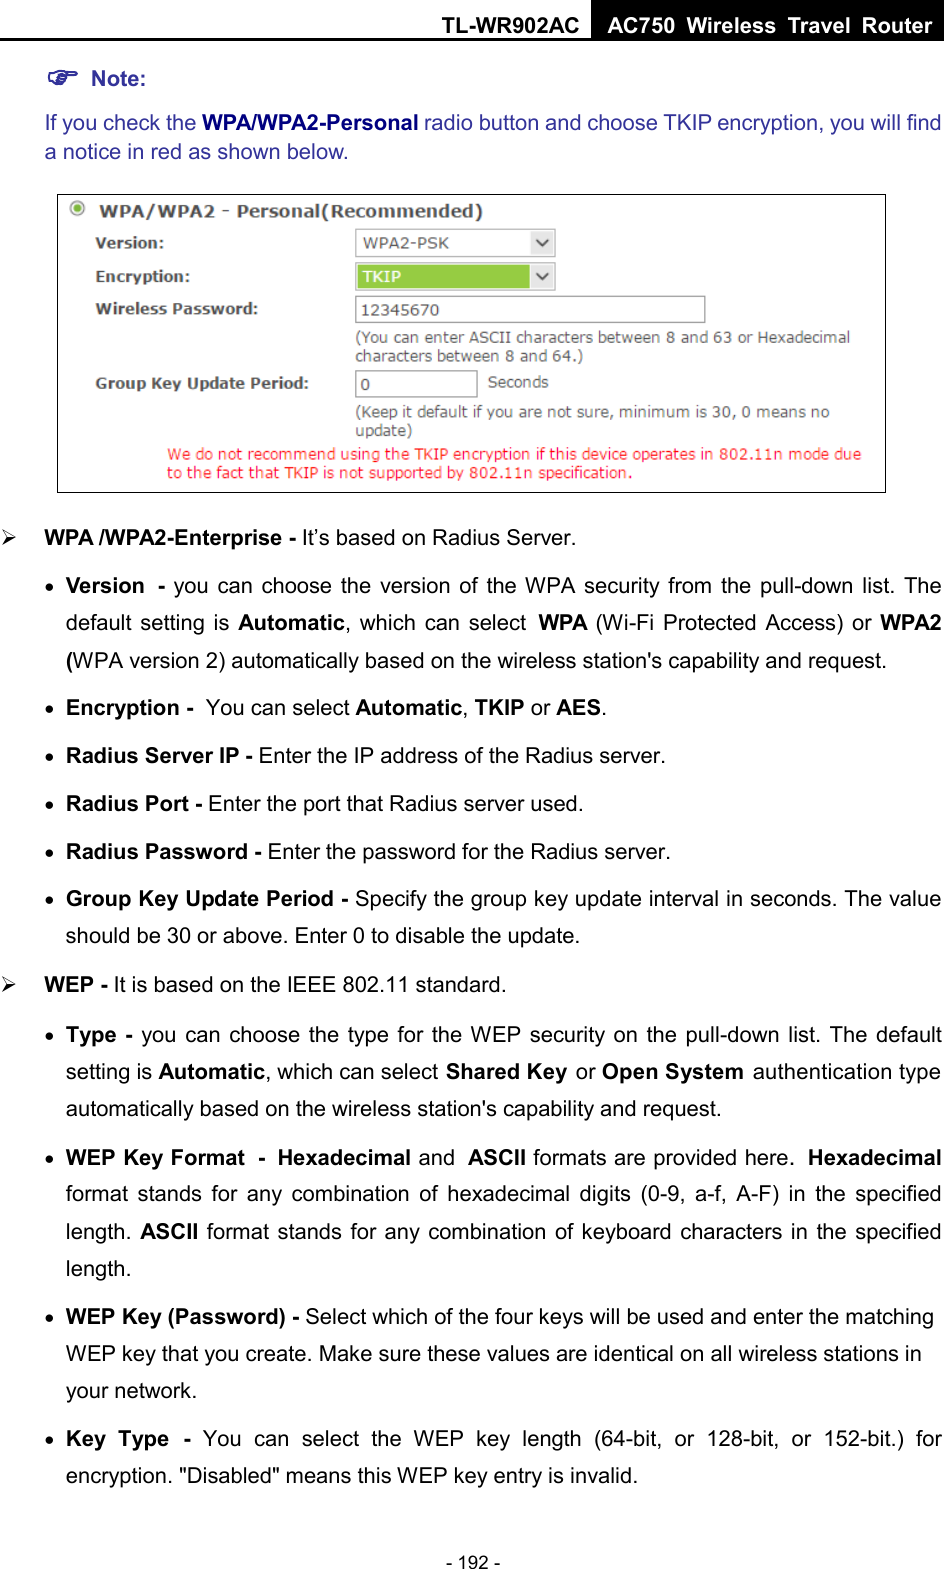 TL-WR902AC AC750  Wireless Travel Router  - 192 -  Note:   If you check the WPA/WPA2-Personal radio button and choose TKIP encryption, you will find a notice in red as shown below.   WPA /WPA2-Enterprise - It’s based on Radius Server. • Version - you can choose the version of the WPA security from the pull-down list. The default setting is Automatic, which can select WPA (Wi-Fi Protected Access) or  WPA2 (WPA version 2) automatically based on the wireless station&apos;s capability and request. • Encryption - You can select Automatic, TKIP or AES. • Radius Server IP - Enter the IP address of the Radius server. • Radius Port - Enter the port that Radius server used. • Radius Password - Enter the password for the Radius server. • Group Key Update Period - Specify the group key update interval in seconds. The value should be 30 or above. Enter 0 to disable the update.  WEP - It is based on the IEEE 802.11 standard.   • Type - you can choose the type for the WEP security on the pull-down list. The default setting is Automatic, which can select Shared Key or Open System authentication type automatically based on the wireless station&apos;s capability and request. • WEP Key Format - Hexadecimal and ASCII formats are provided here. Hexadecimal format stands for any combination of hexadecimal digits (0-9, a-f, A-F) in the specified length. ASCII format stands for any combination of keyboard characters in the specified length.   • WEP Key (Password) - Select which of the four keys will be used and enter the matching WEP key that you create. Make sure these values are identical on all wireless stations in your network.   • Key Type - You can select the WEP key length (64-bit, or 128-bit, or 152-bit.) for encryption. &quot;Disabled&quot; means this WEP key entry is invalid. 